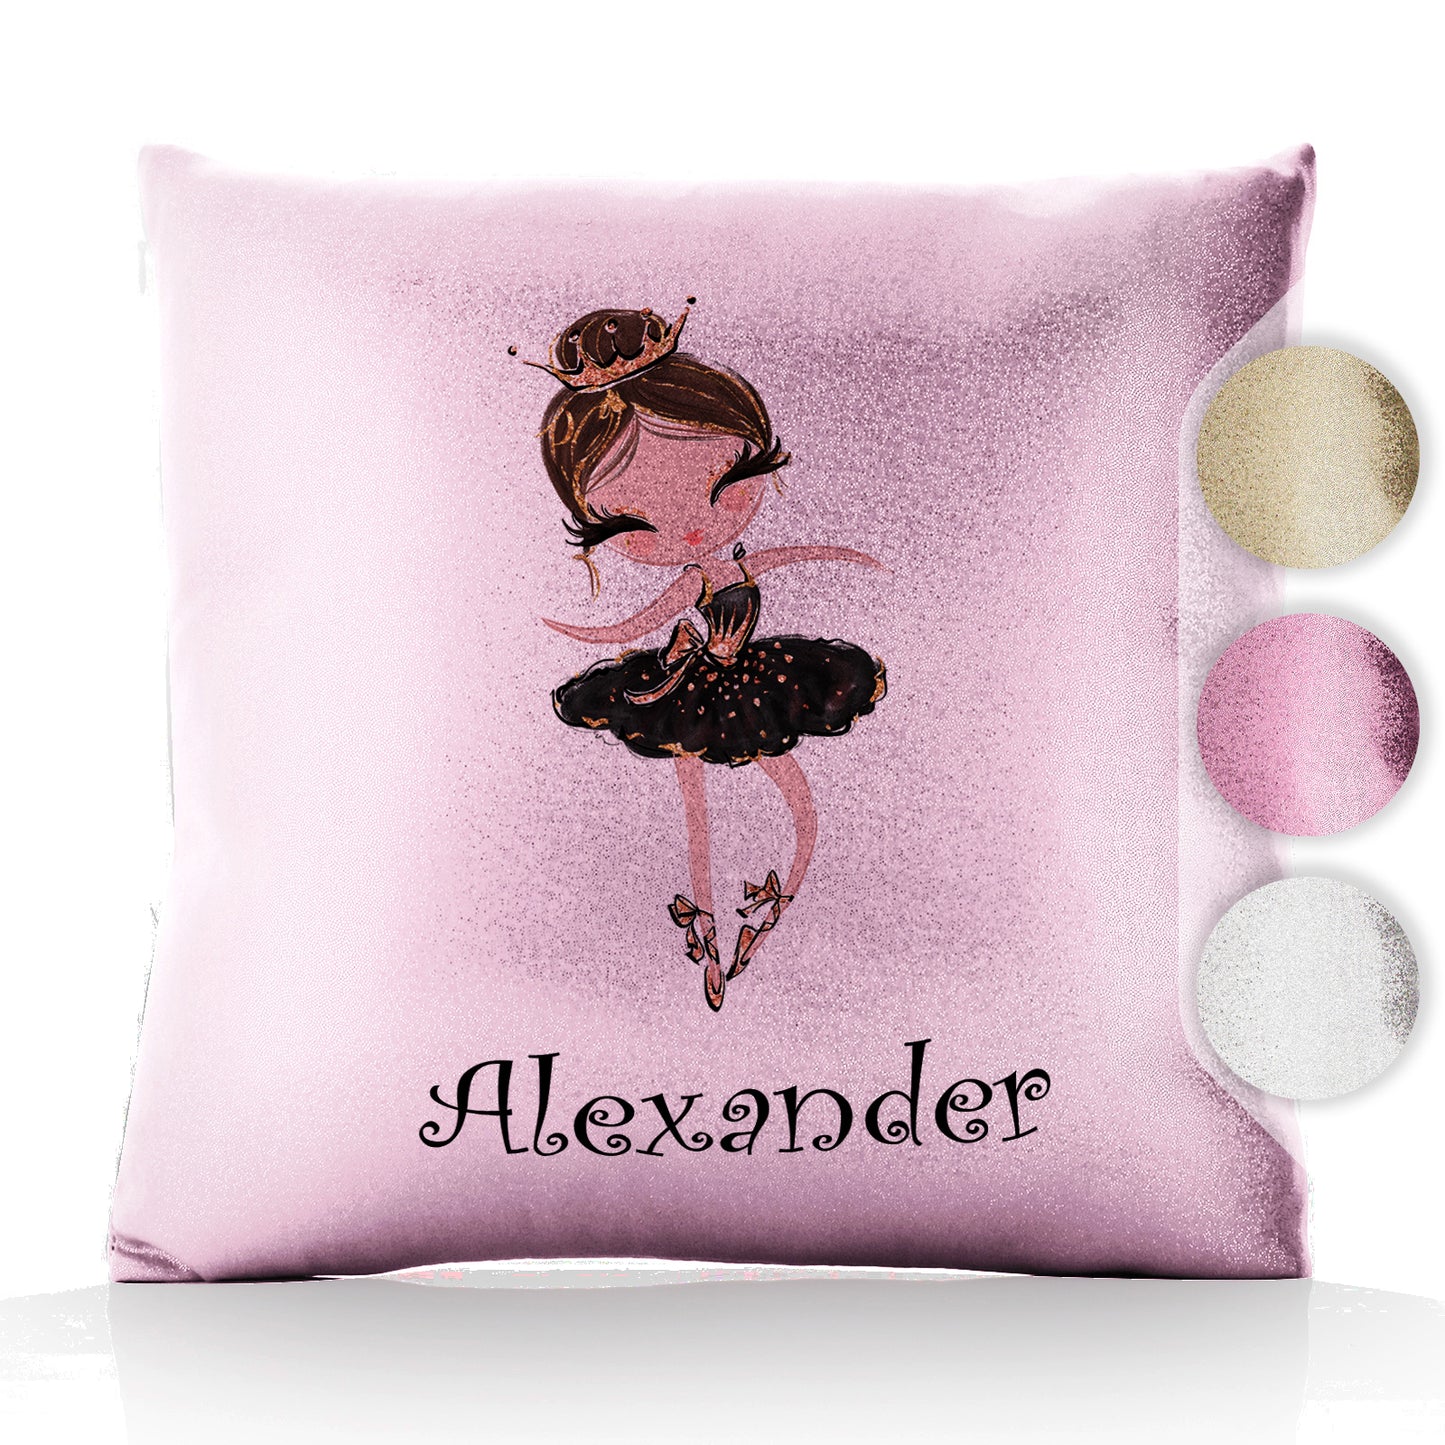 Personalised Glitter Cushion with Cute Text and Light Brown Hair Black Dress Tiara Ballerina